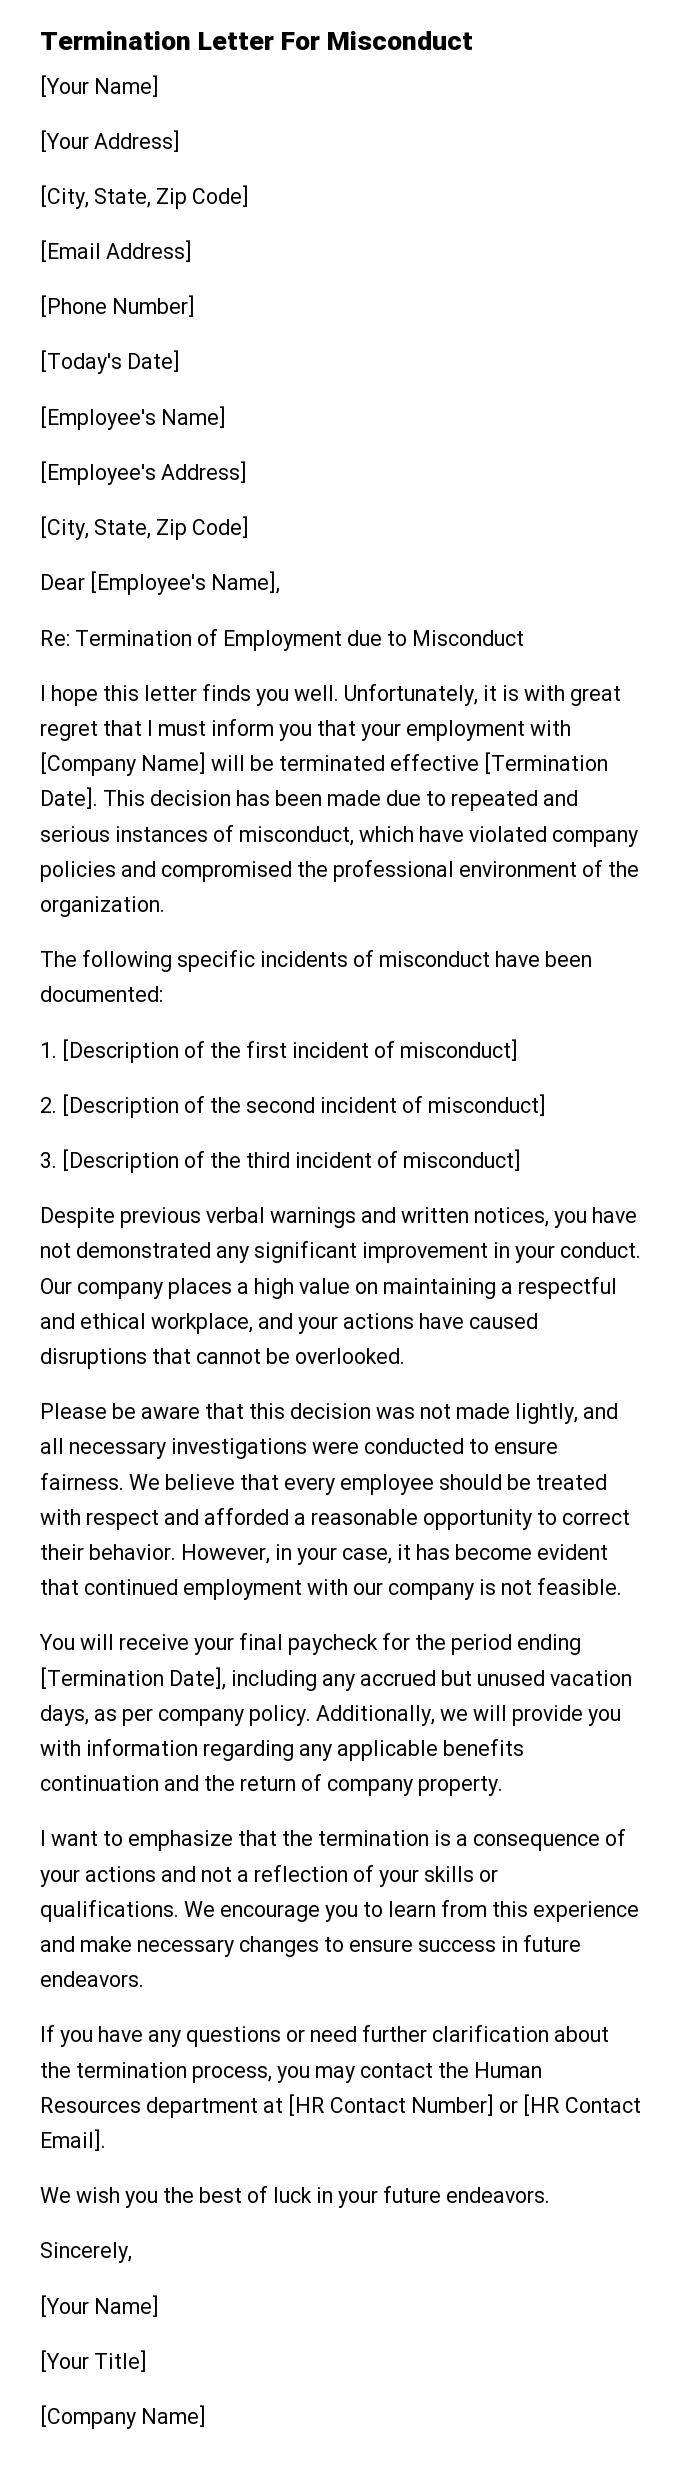 Termination Letter For Misconduct